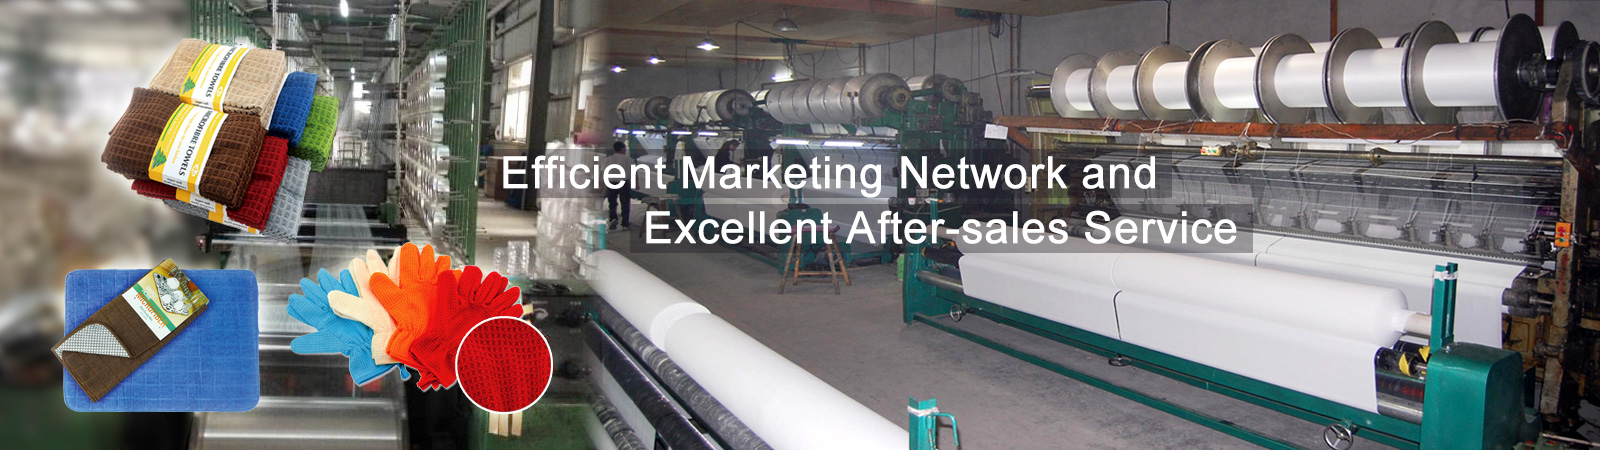 Efficient Marketing Network and Excellent After-sales Service